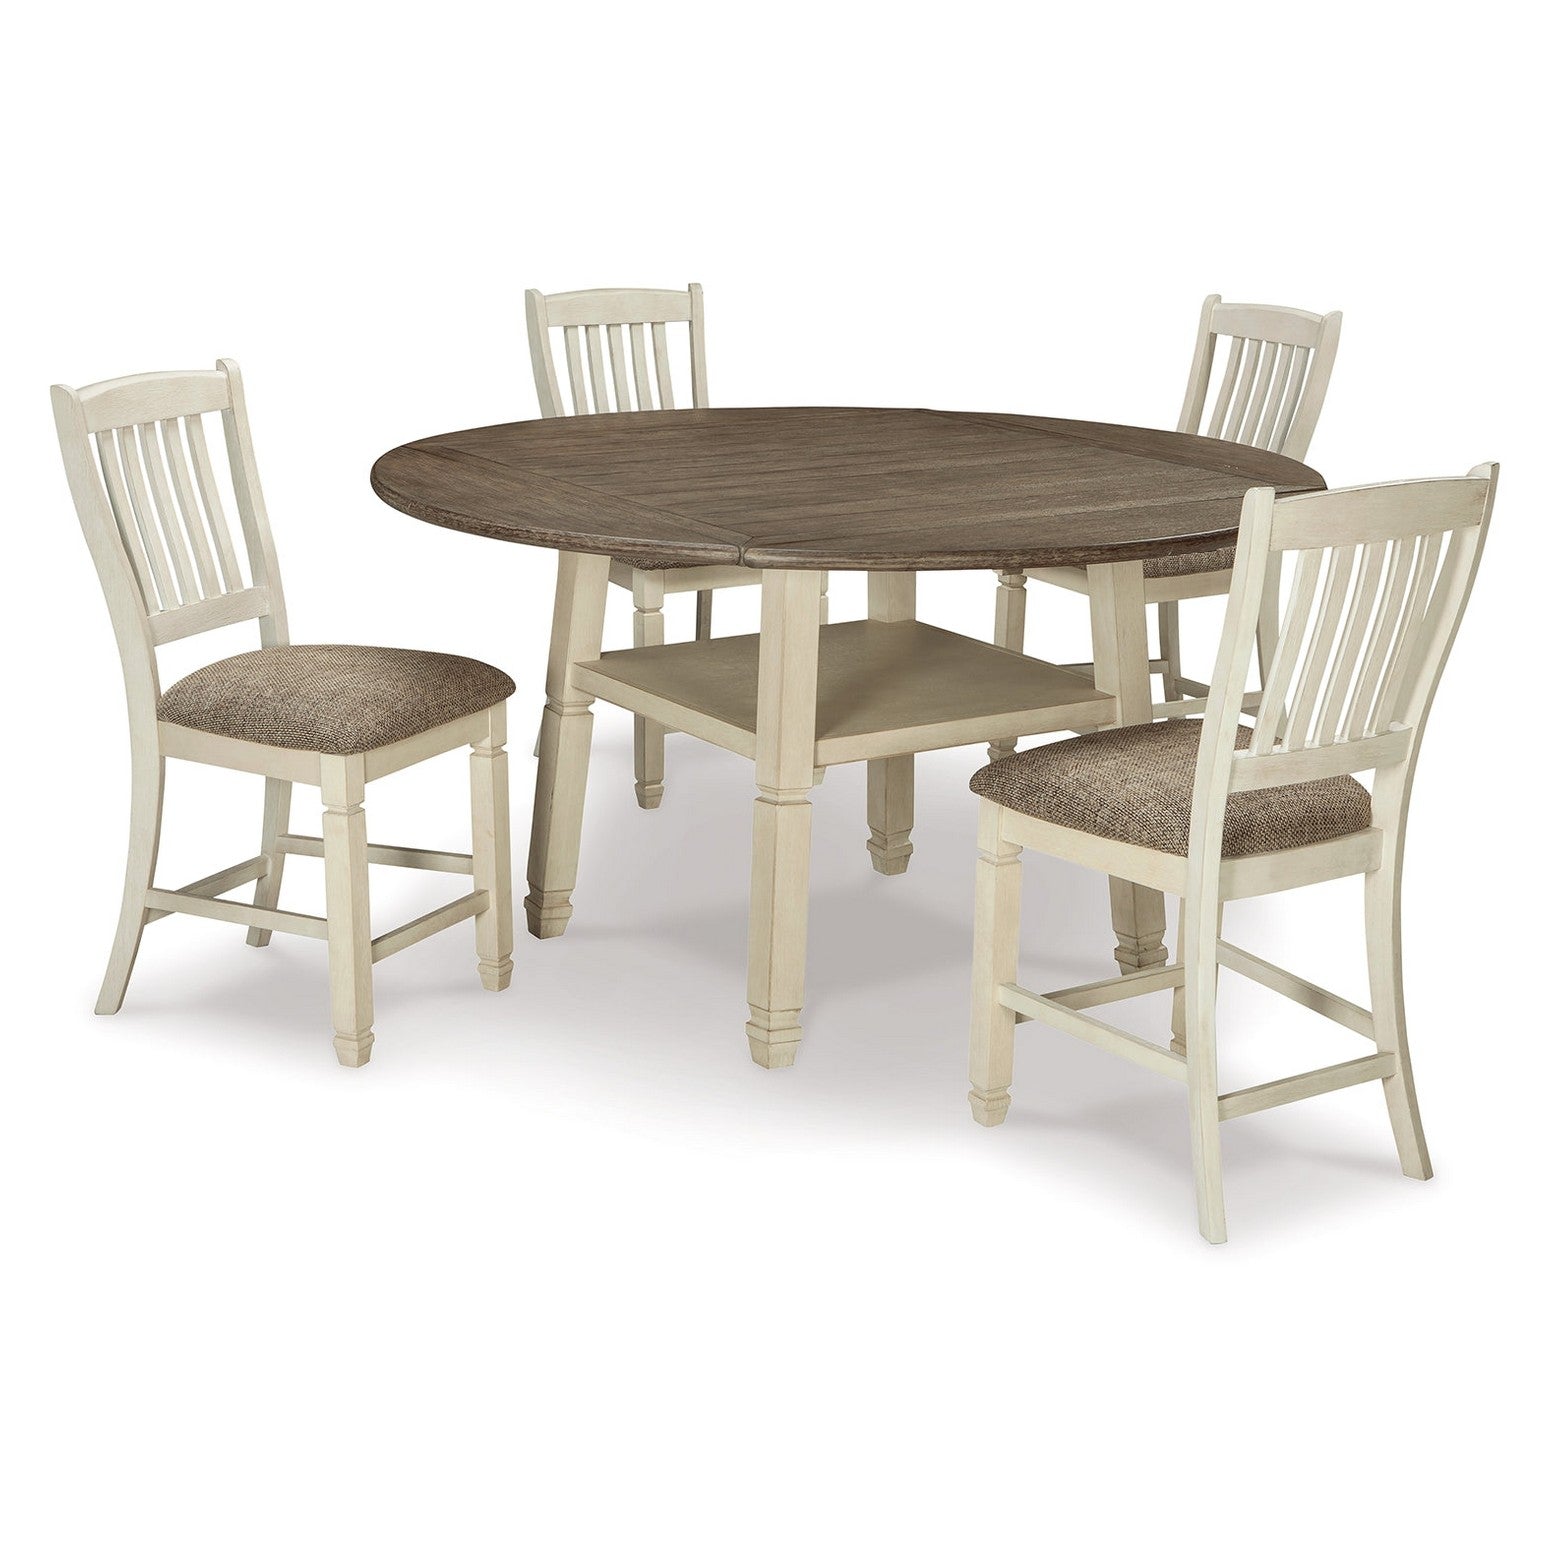 Bolanburg Counter Height Dining Table and 4 Barstools Ash-D647D6